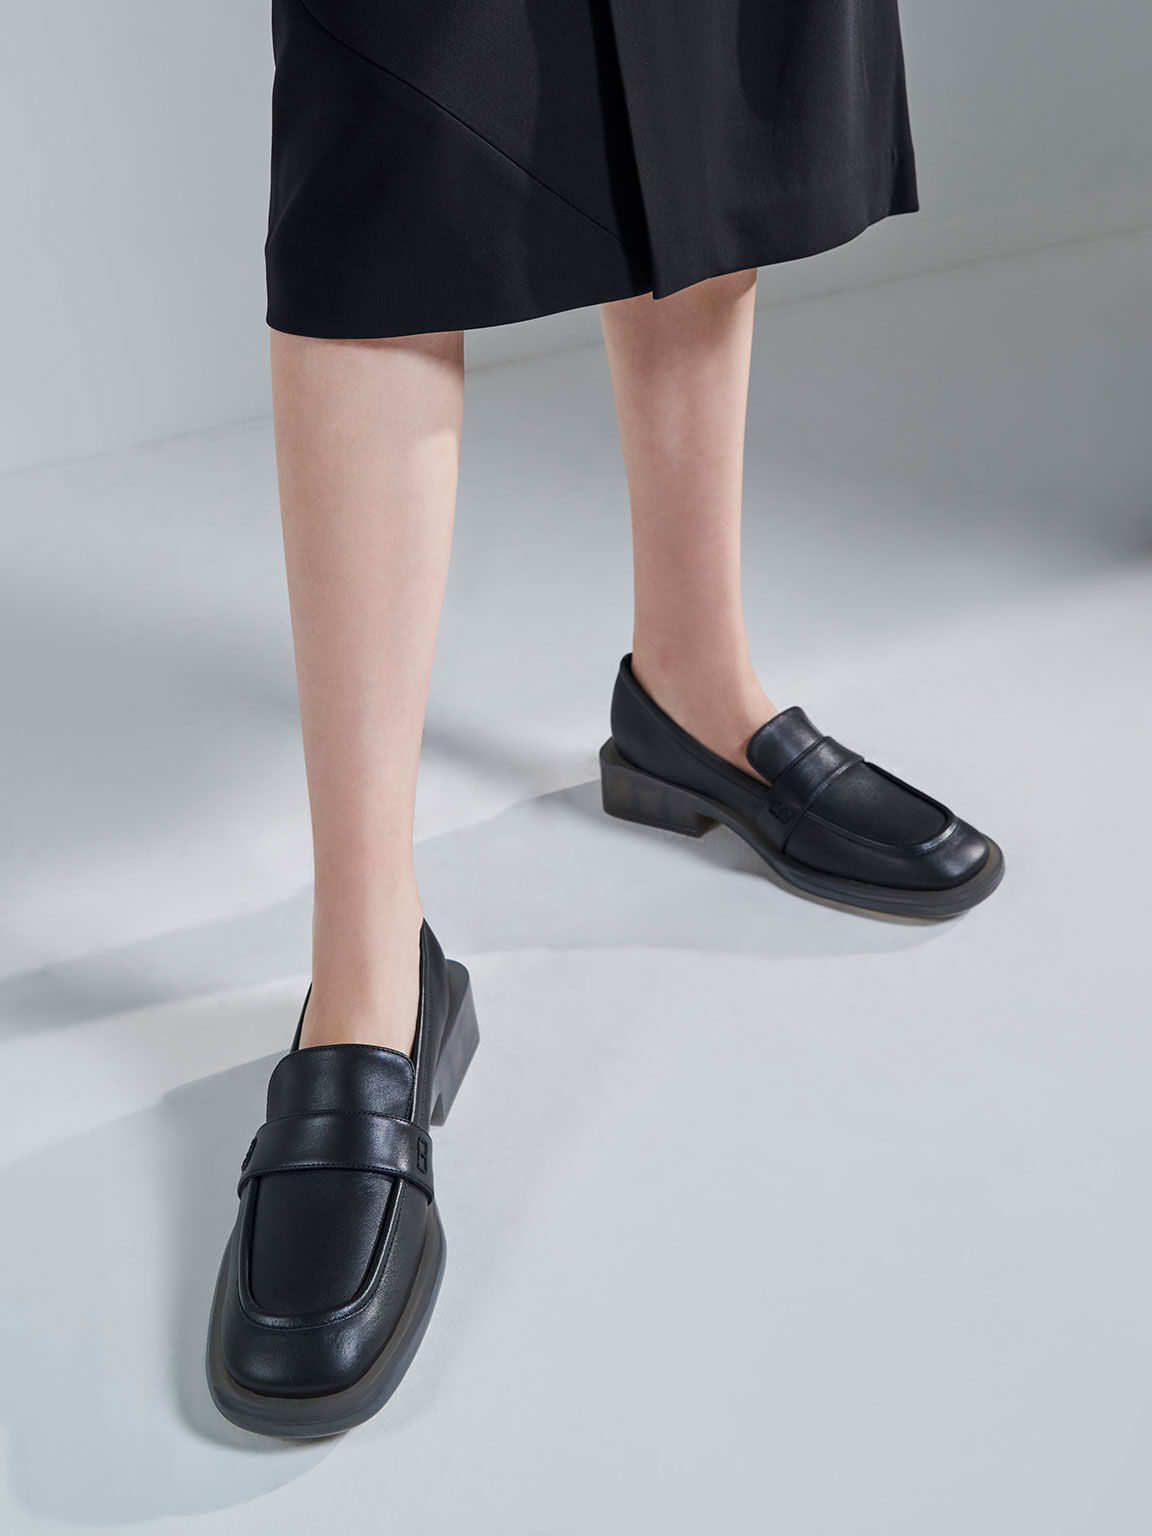 Leather Penny Loafers, Black, hi-res